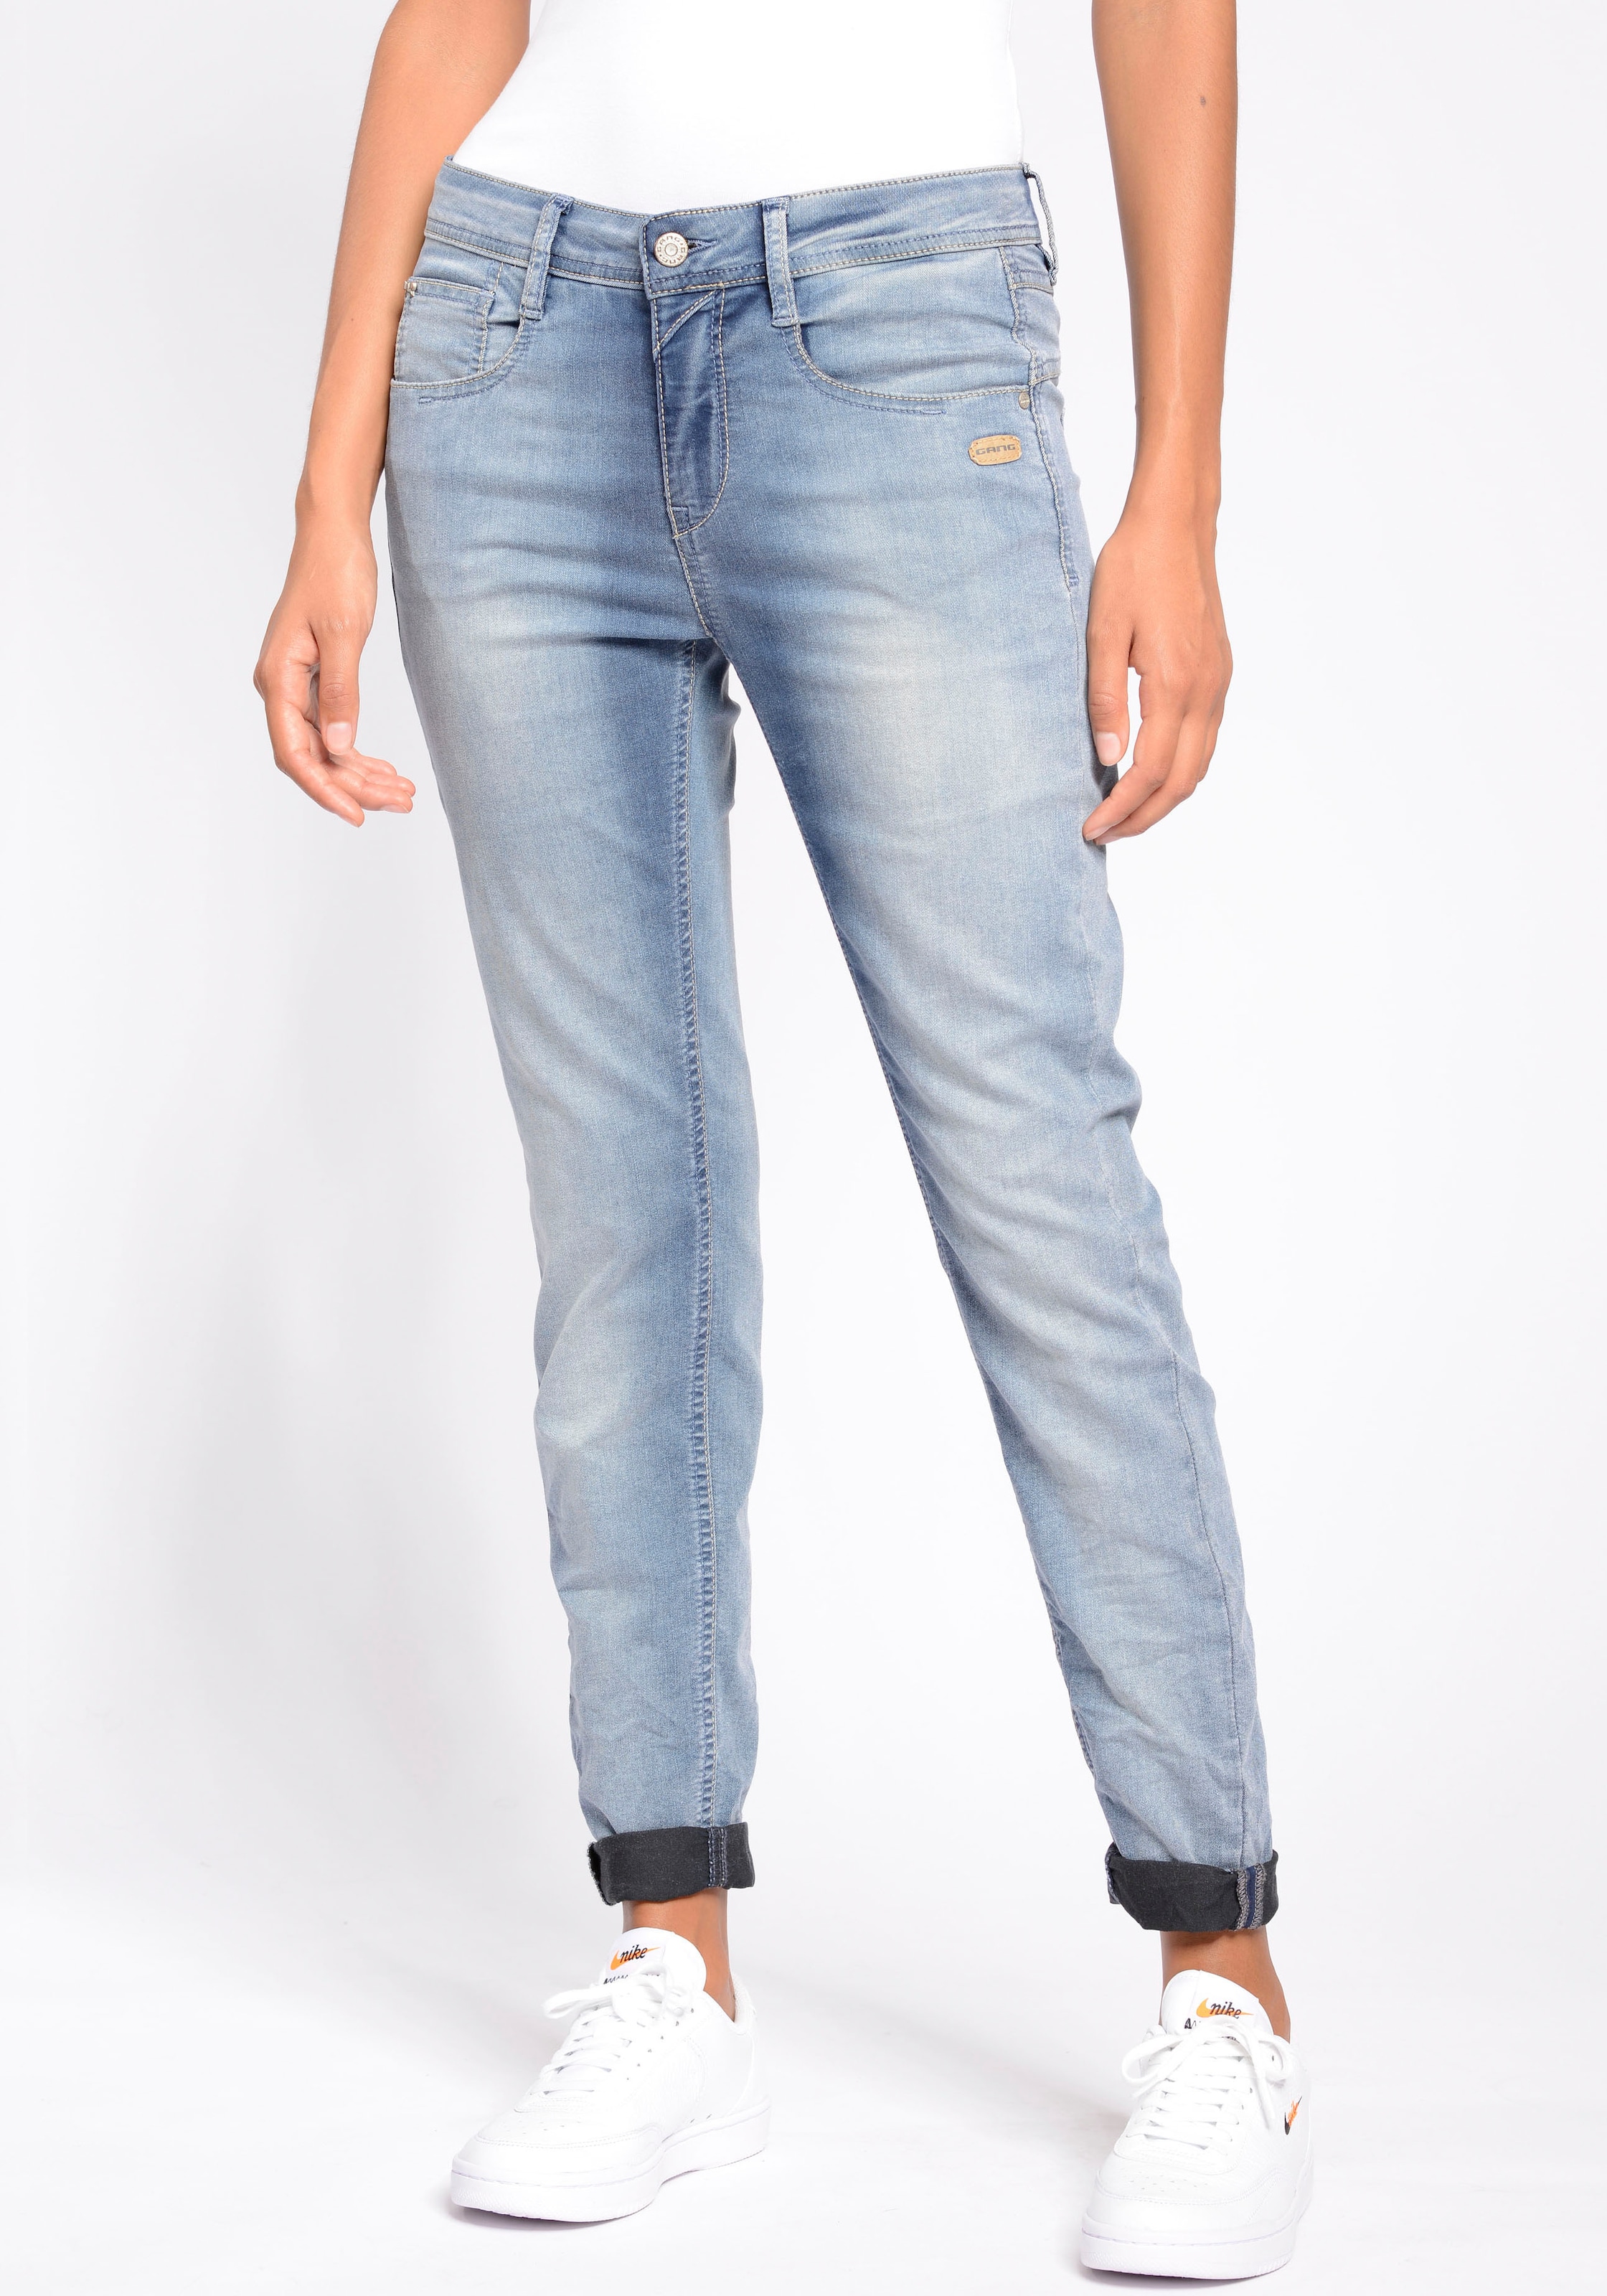 Relax-fit-Jeans Waschung OTTO online GANG in bei Used cooler »94Amelie«,